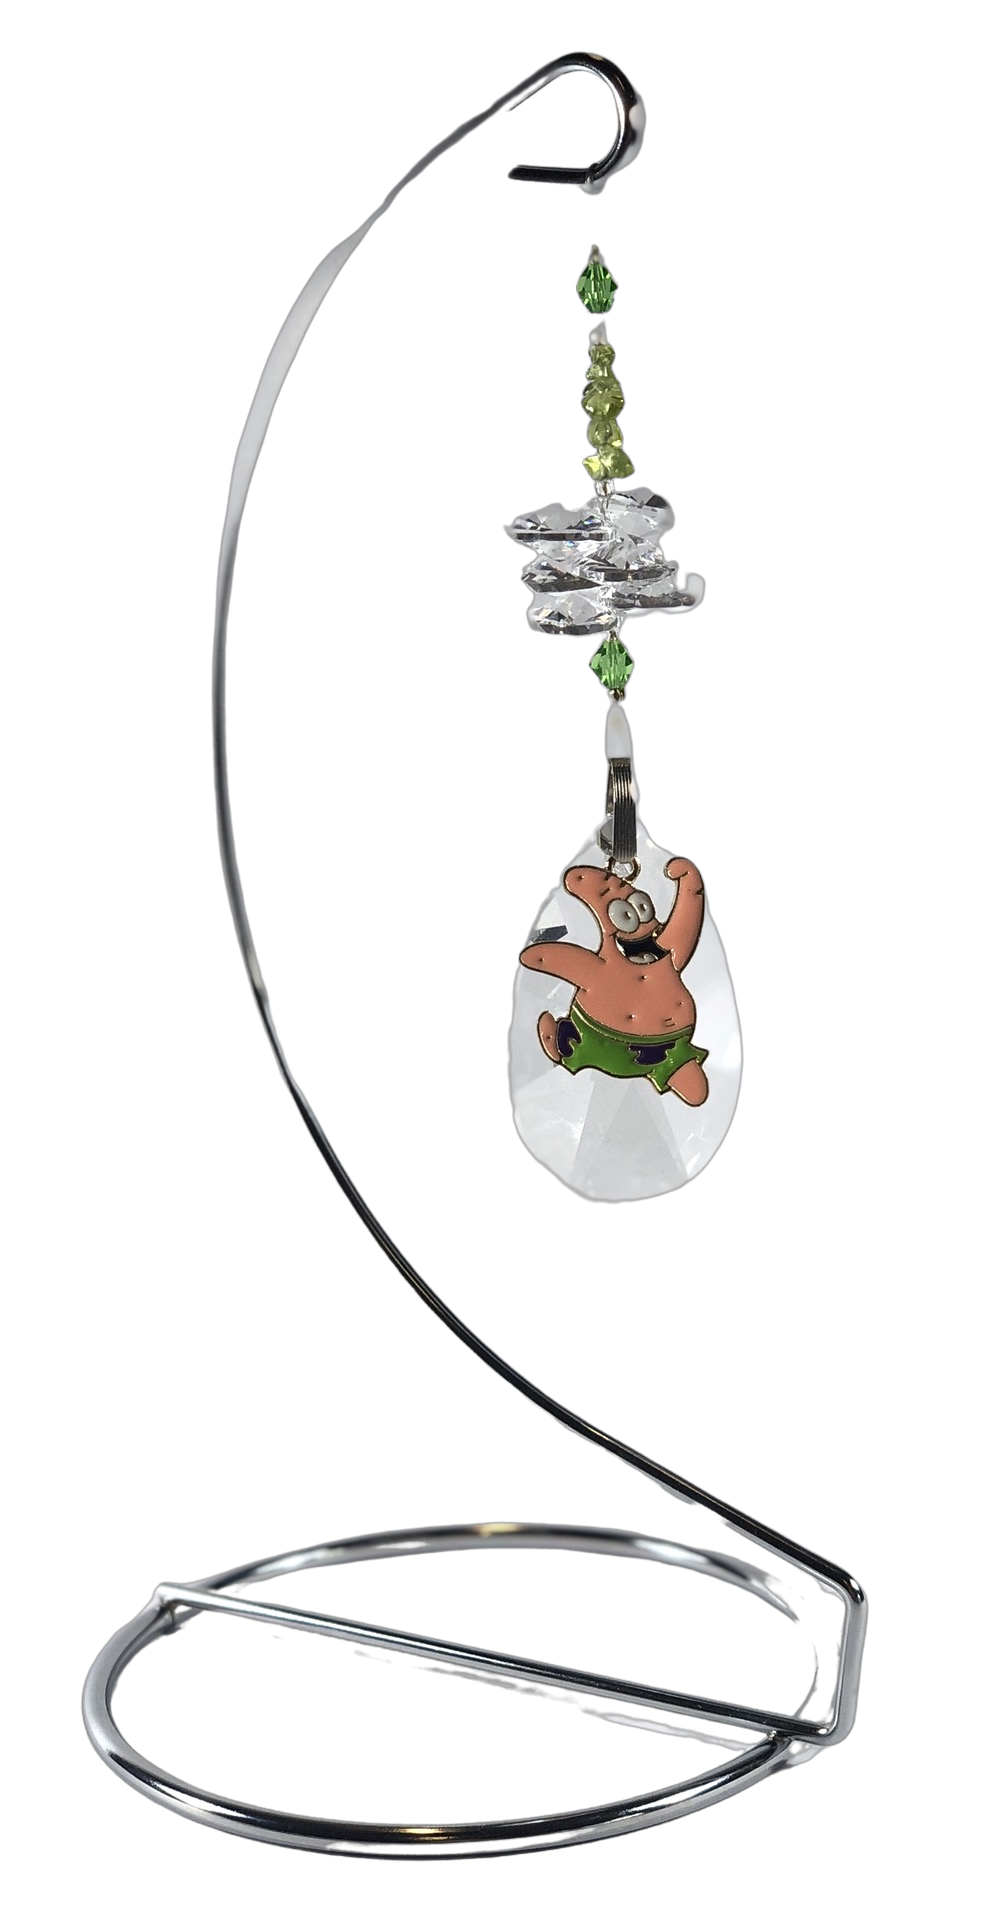 Sponge Bob - Patrick crystal suncatcher is decorated with peridot gemstones and come on this amazing stand.